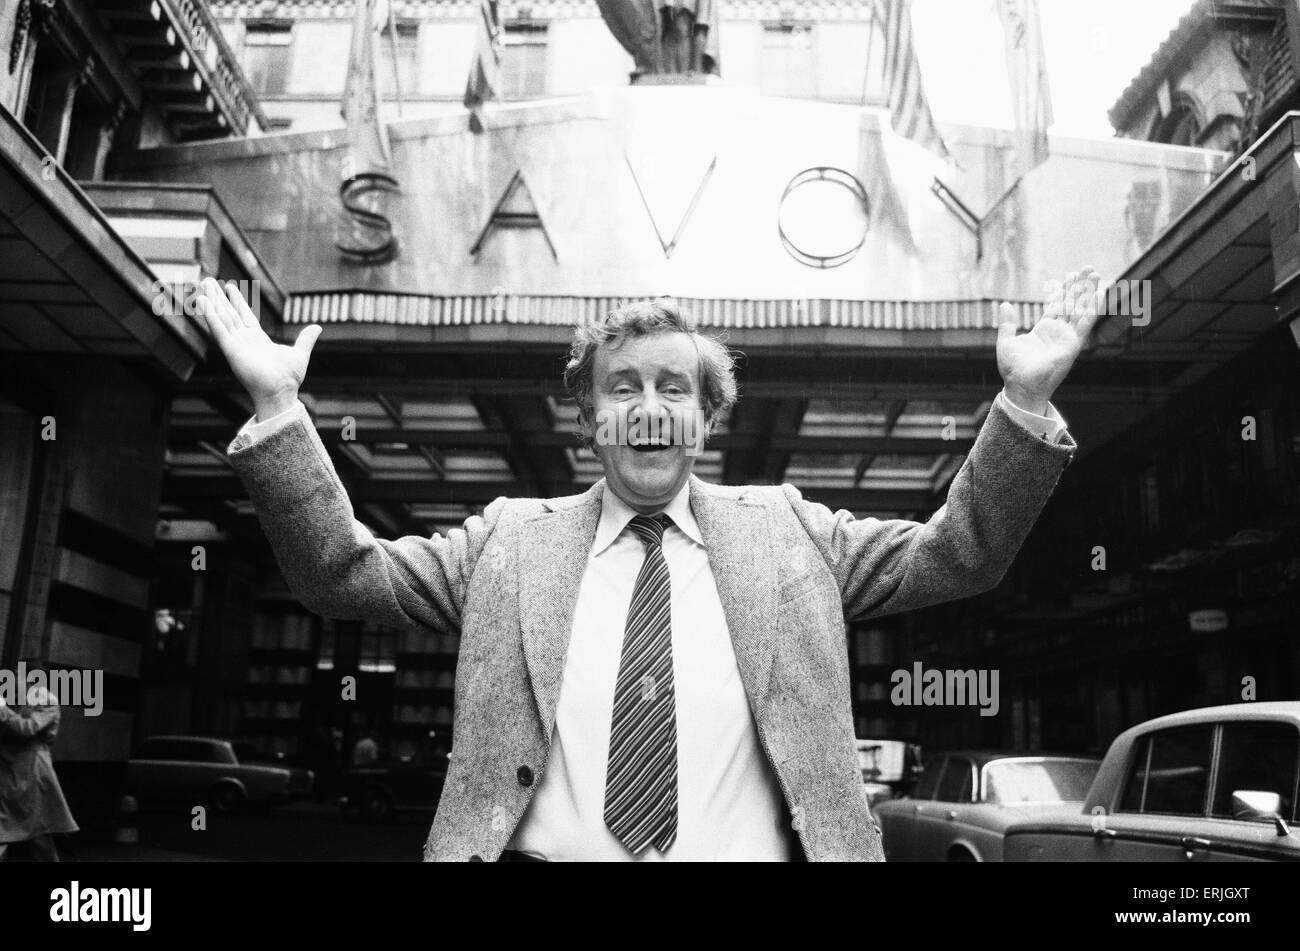 Actor Richard Briers seen here at the Savoy whilst out and about in London's Theatre land. 10th March 1981 Stock Photo